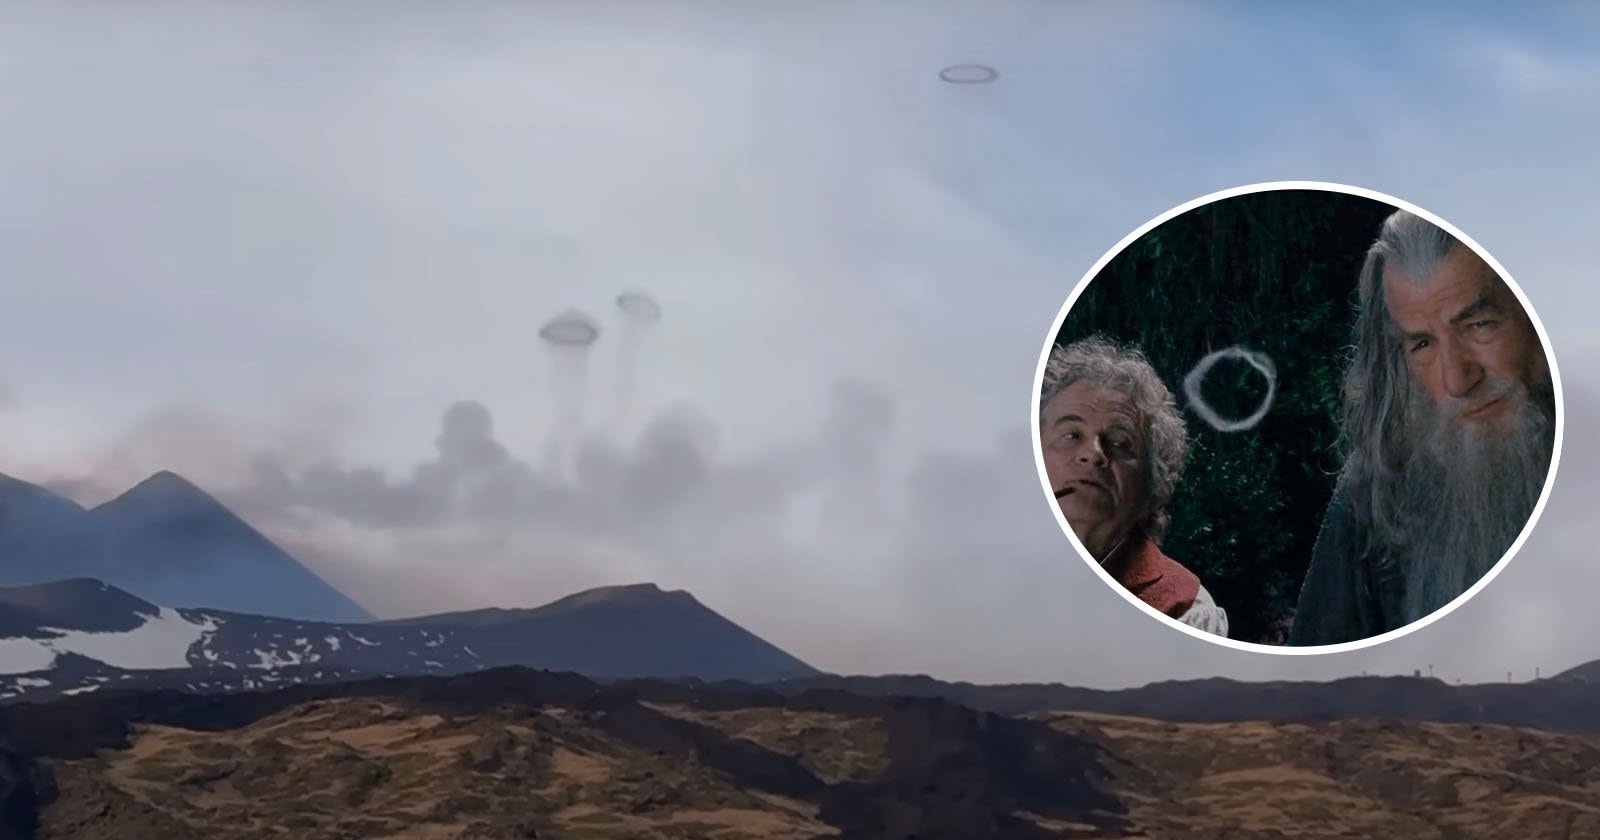 Perfect Smoke Rings Blow Out of the 'Gandalf of Volcanoes'